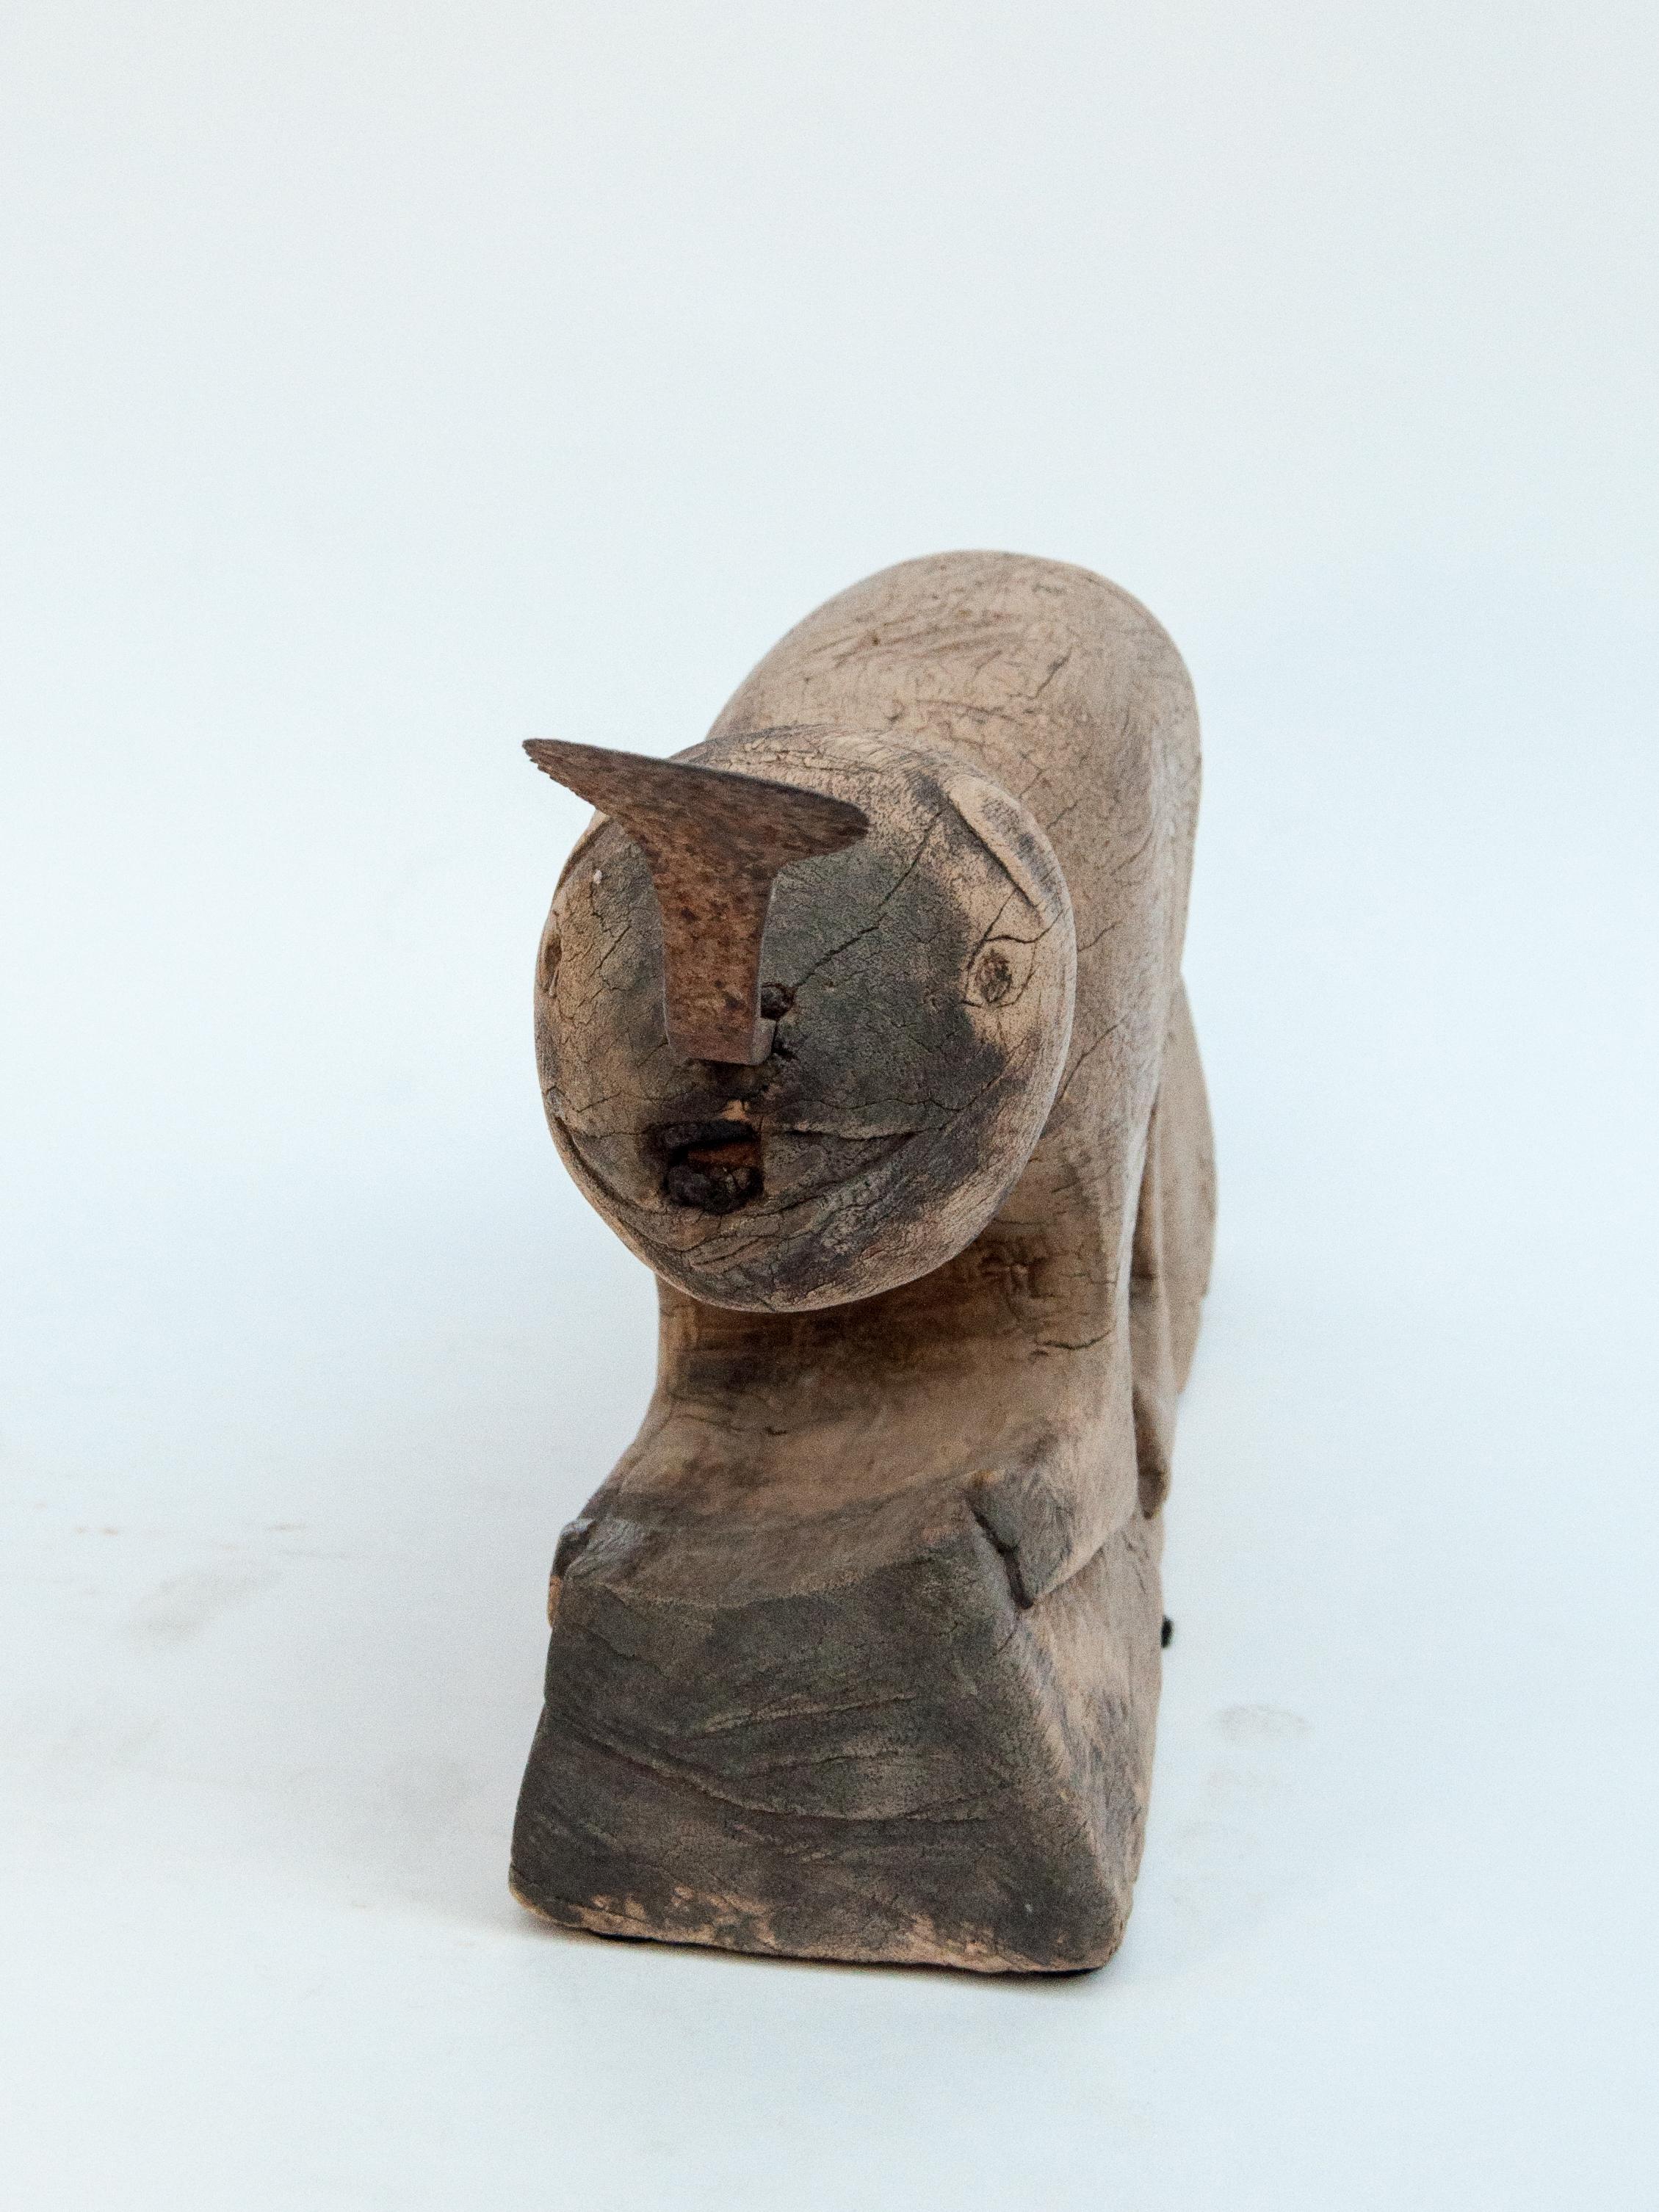 Hand-Carved Carved Wooden Coconut Grater, Animal Motif, North Thailand, Mid-20th Century